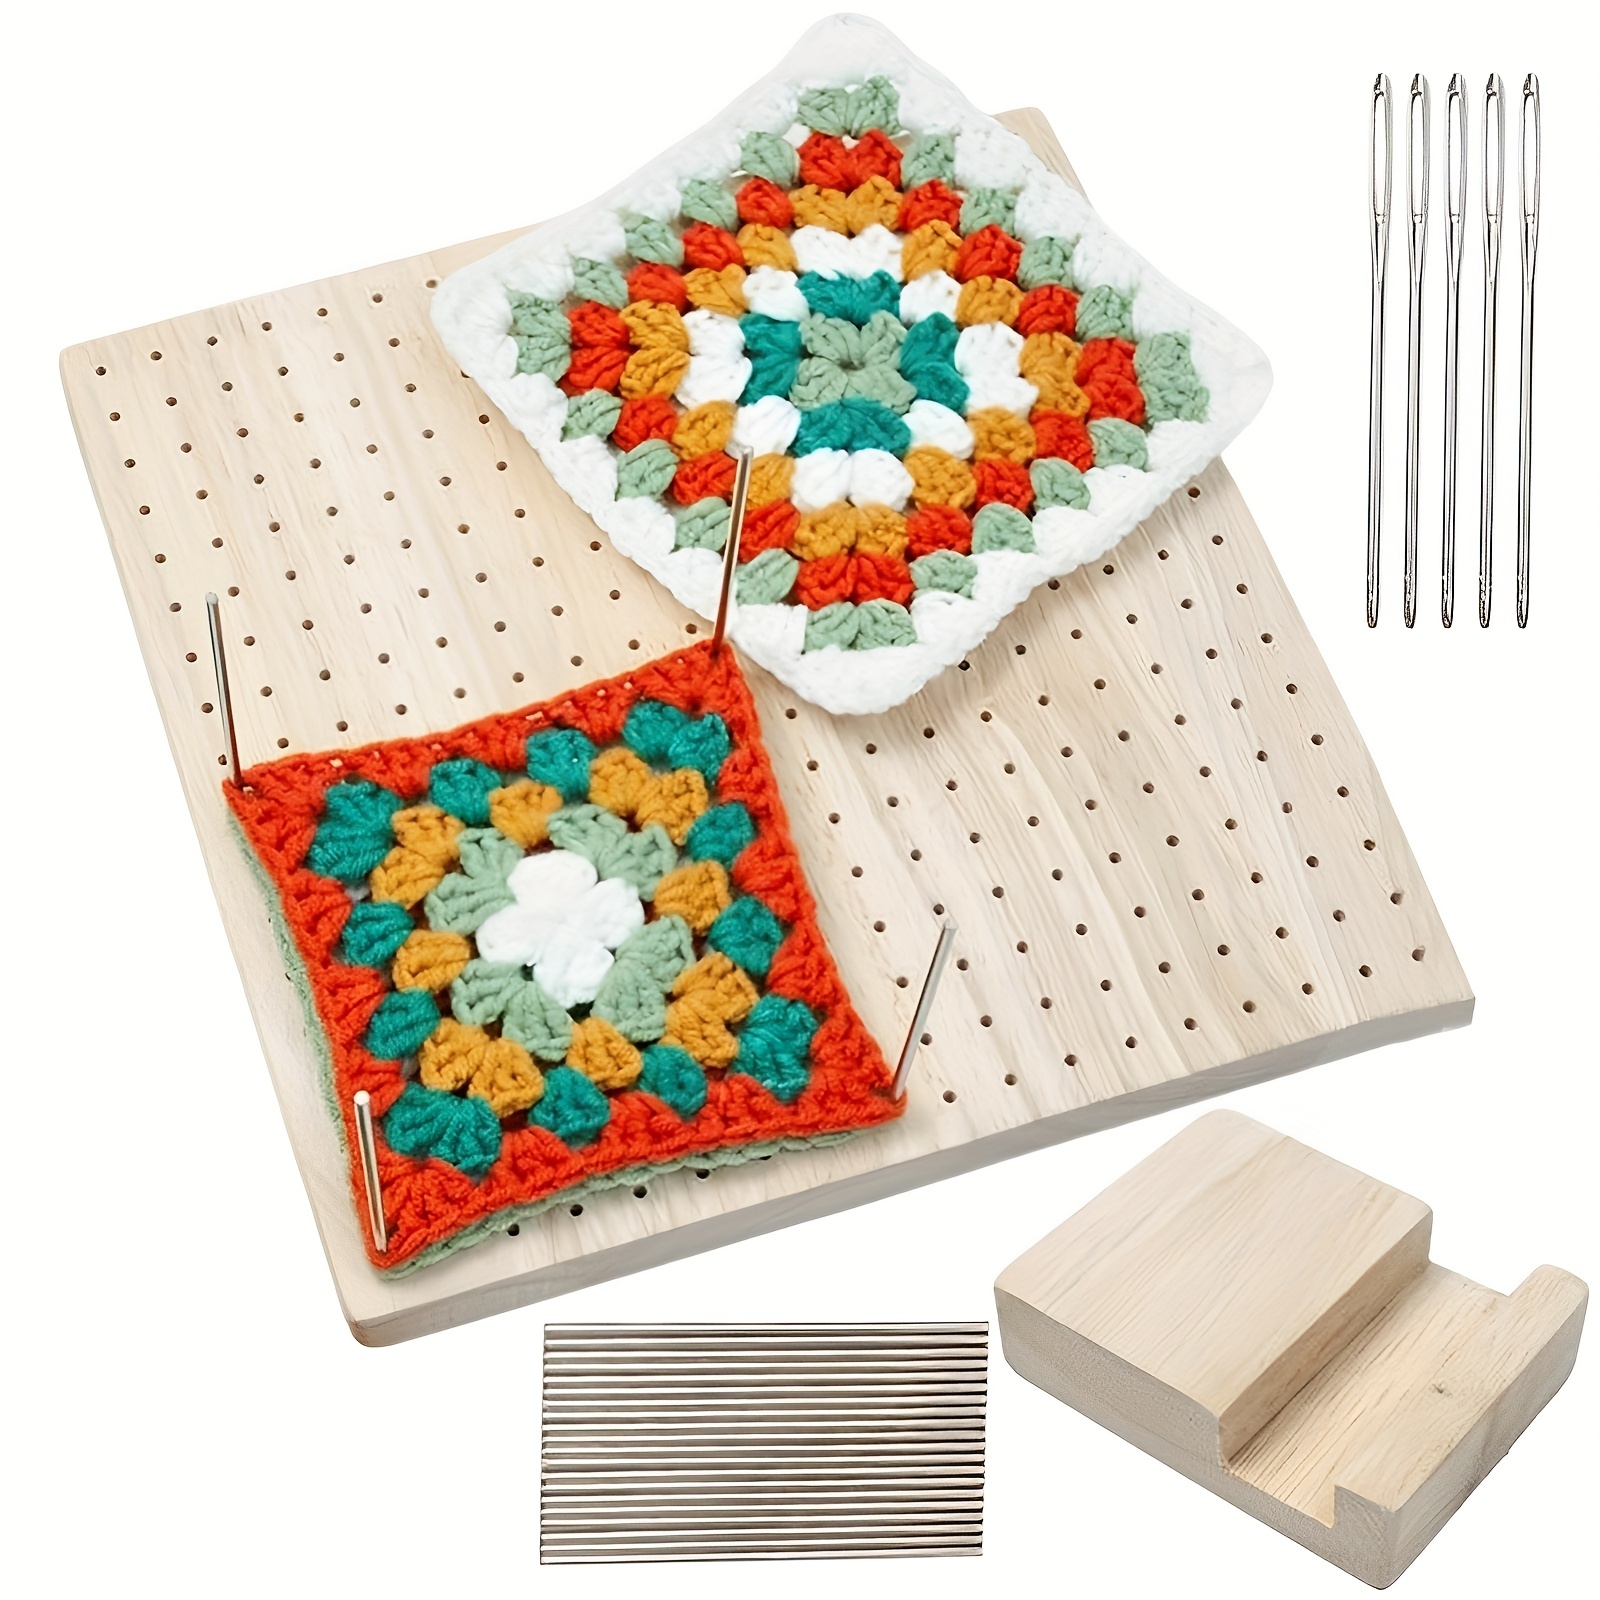 Handcrafted Wooden Blocking Board, Crochet Kits For Beginners Adults, Wooden Blocking Mat For Knitting With 20 Stainless Steel Pins And Pin  Holder T